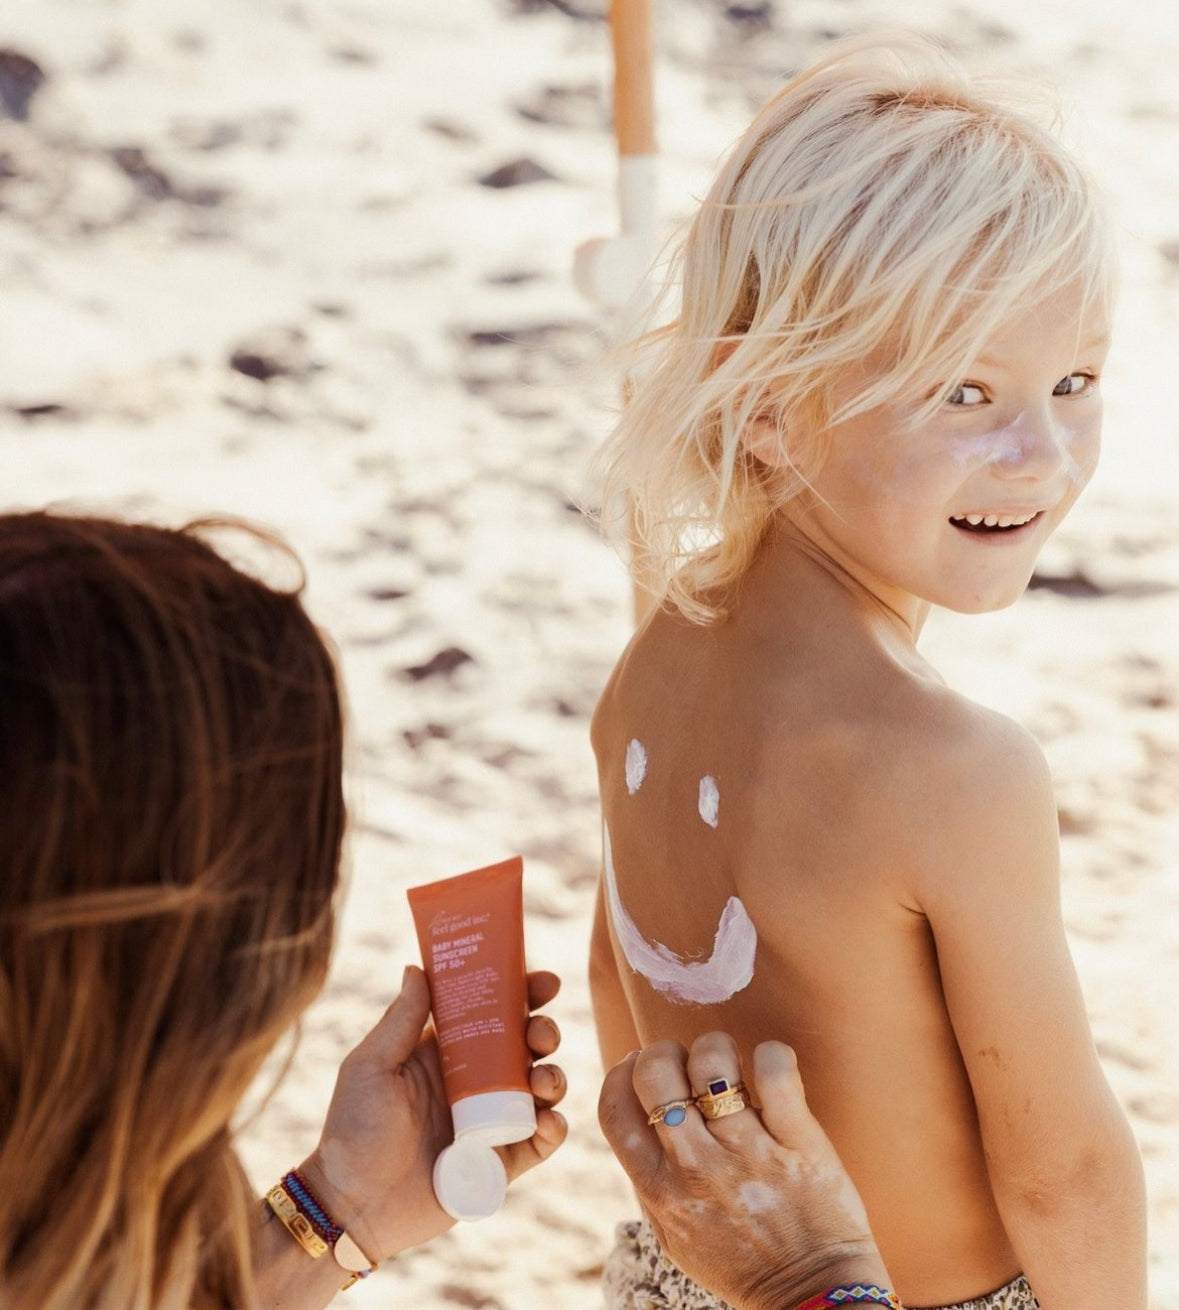 Baby Mineral Sunscreen SPF 50+ - We Are Feel Good Inc | MLC Space